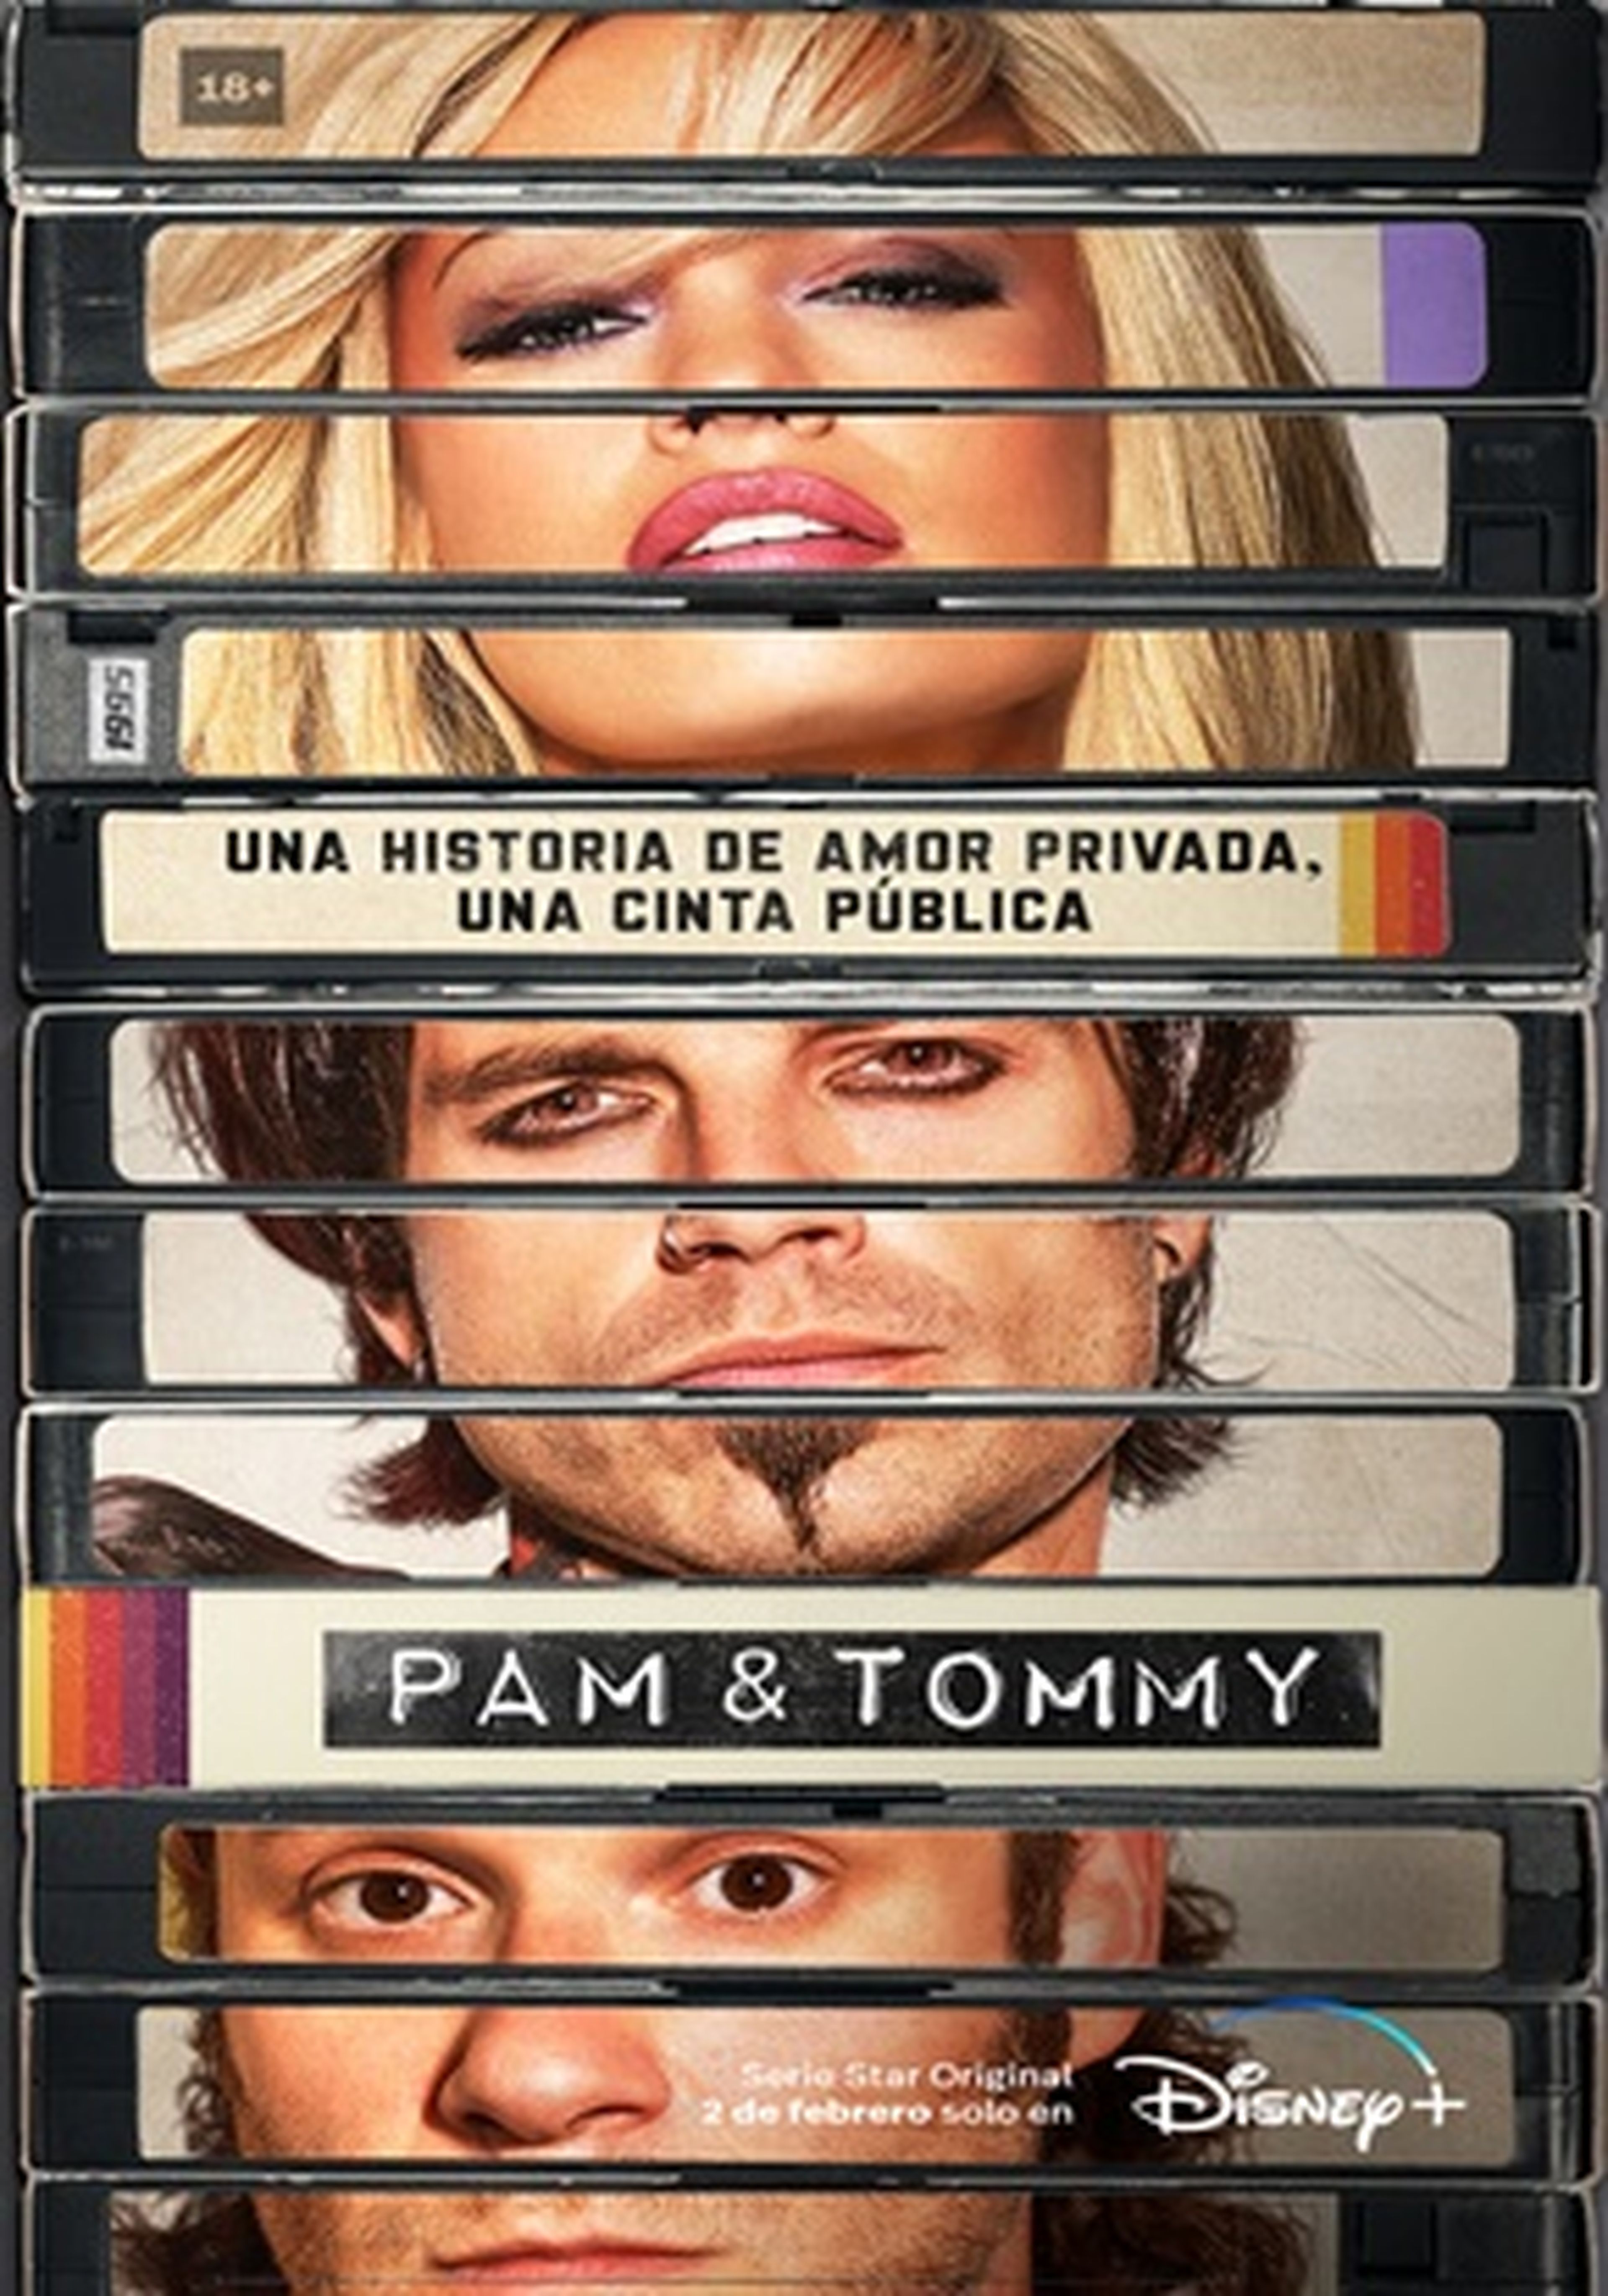 Pam & Tommy cartel